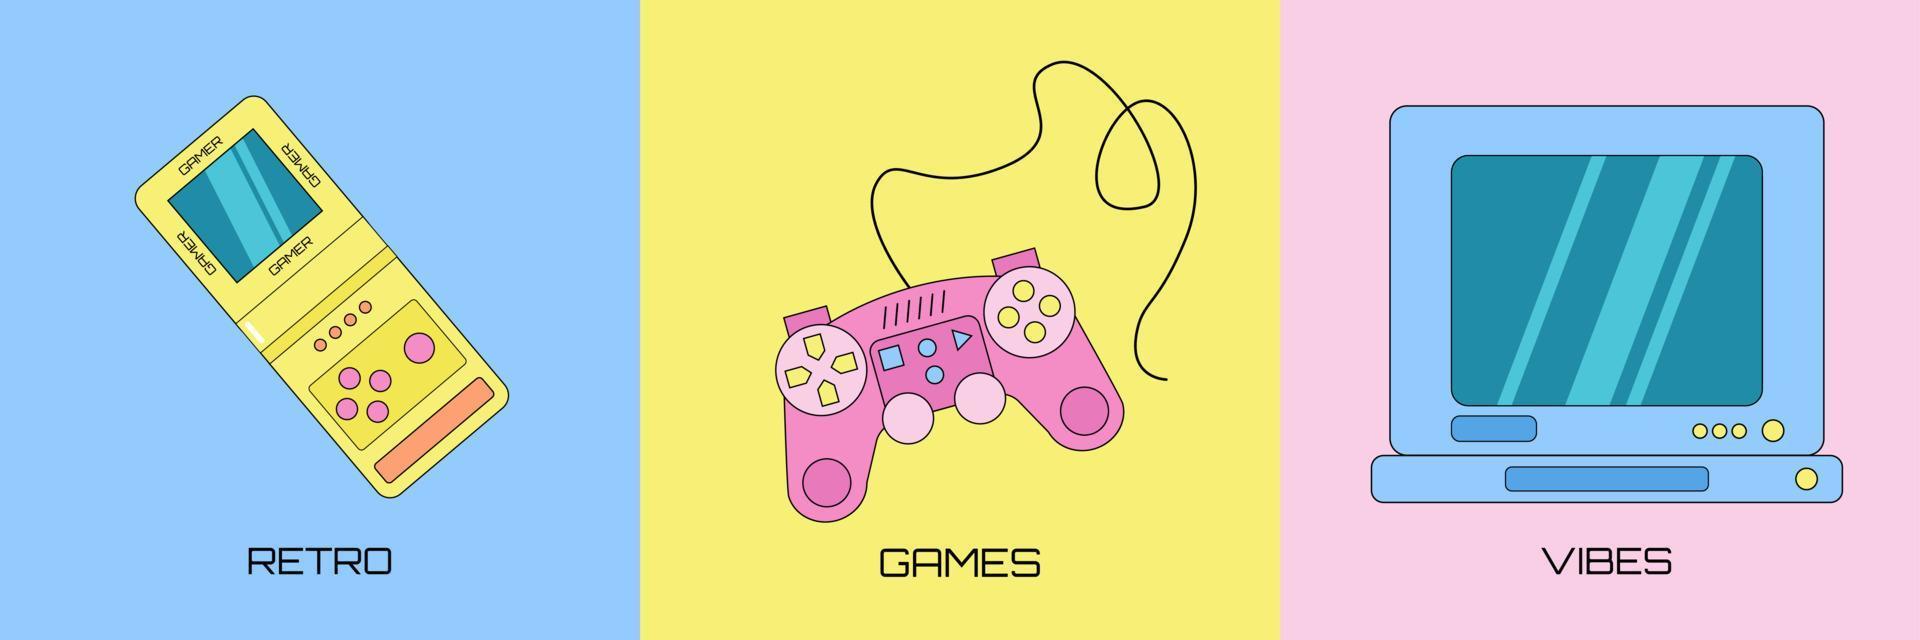 Set of three retro gaming elements, game console, gamepad and old fashioned computer monitor on a colorful background. vector